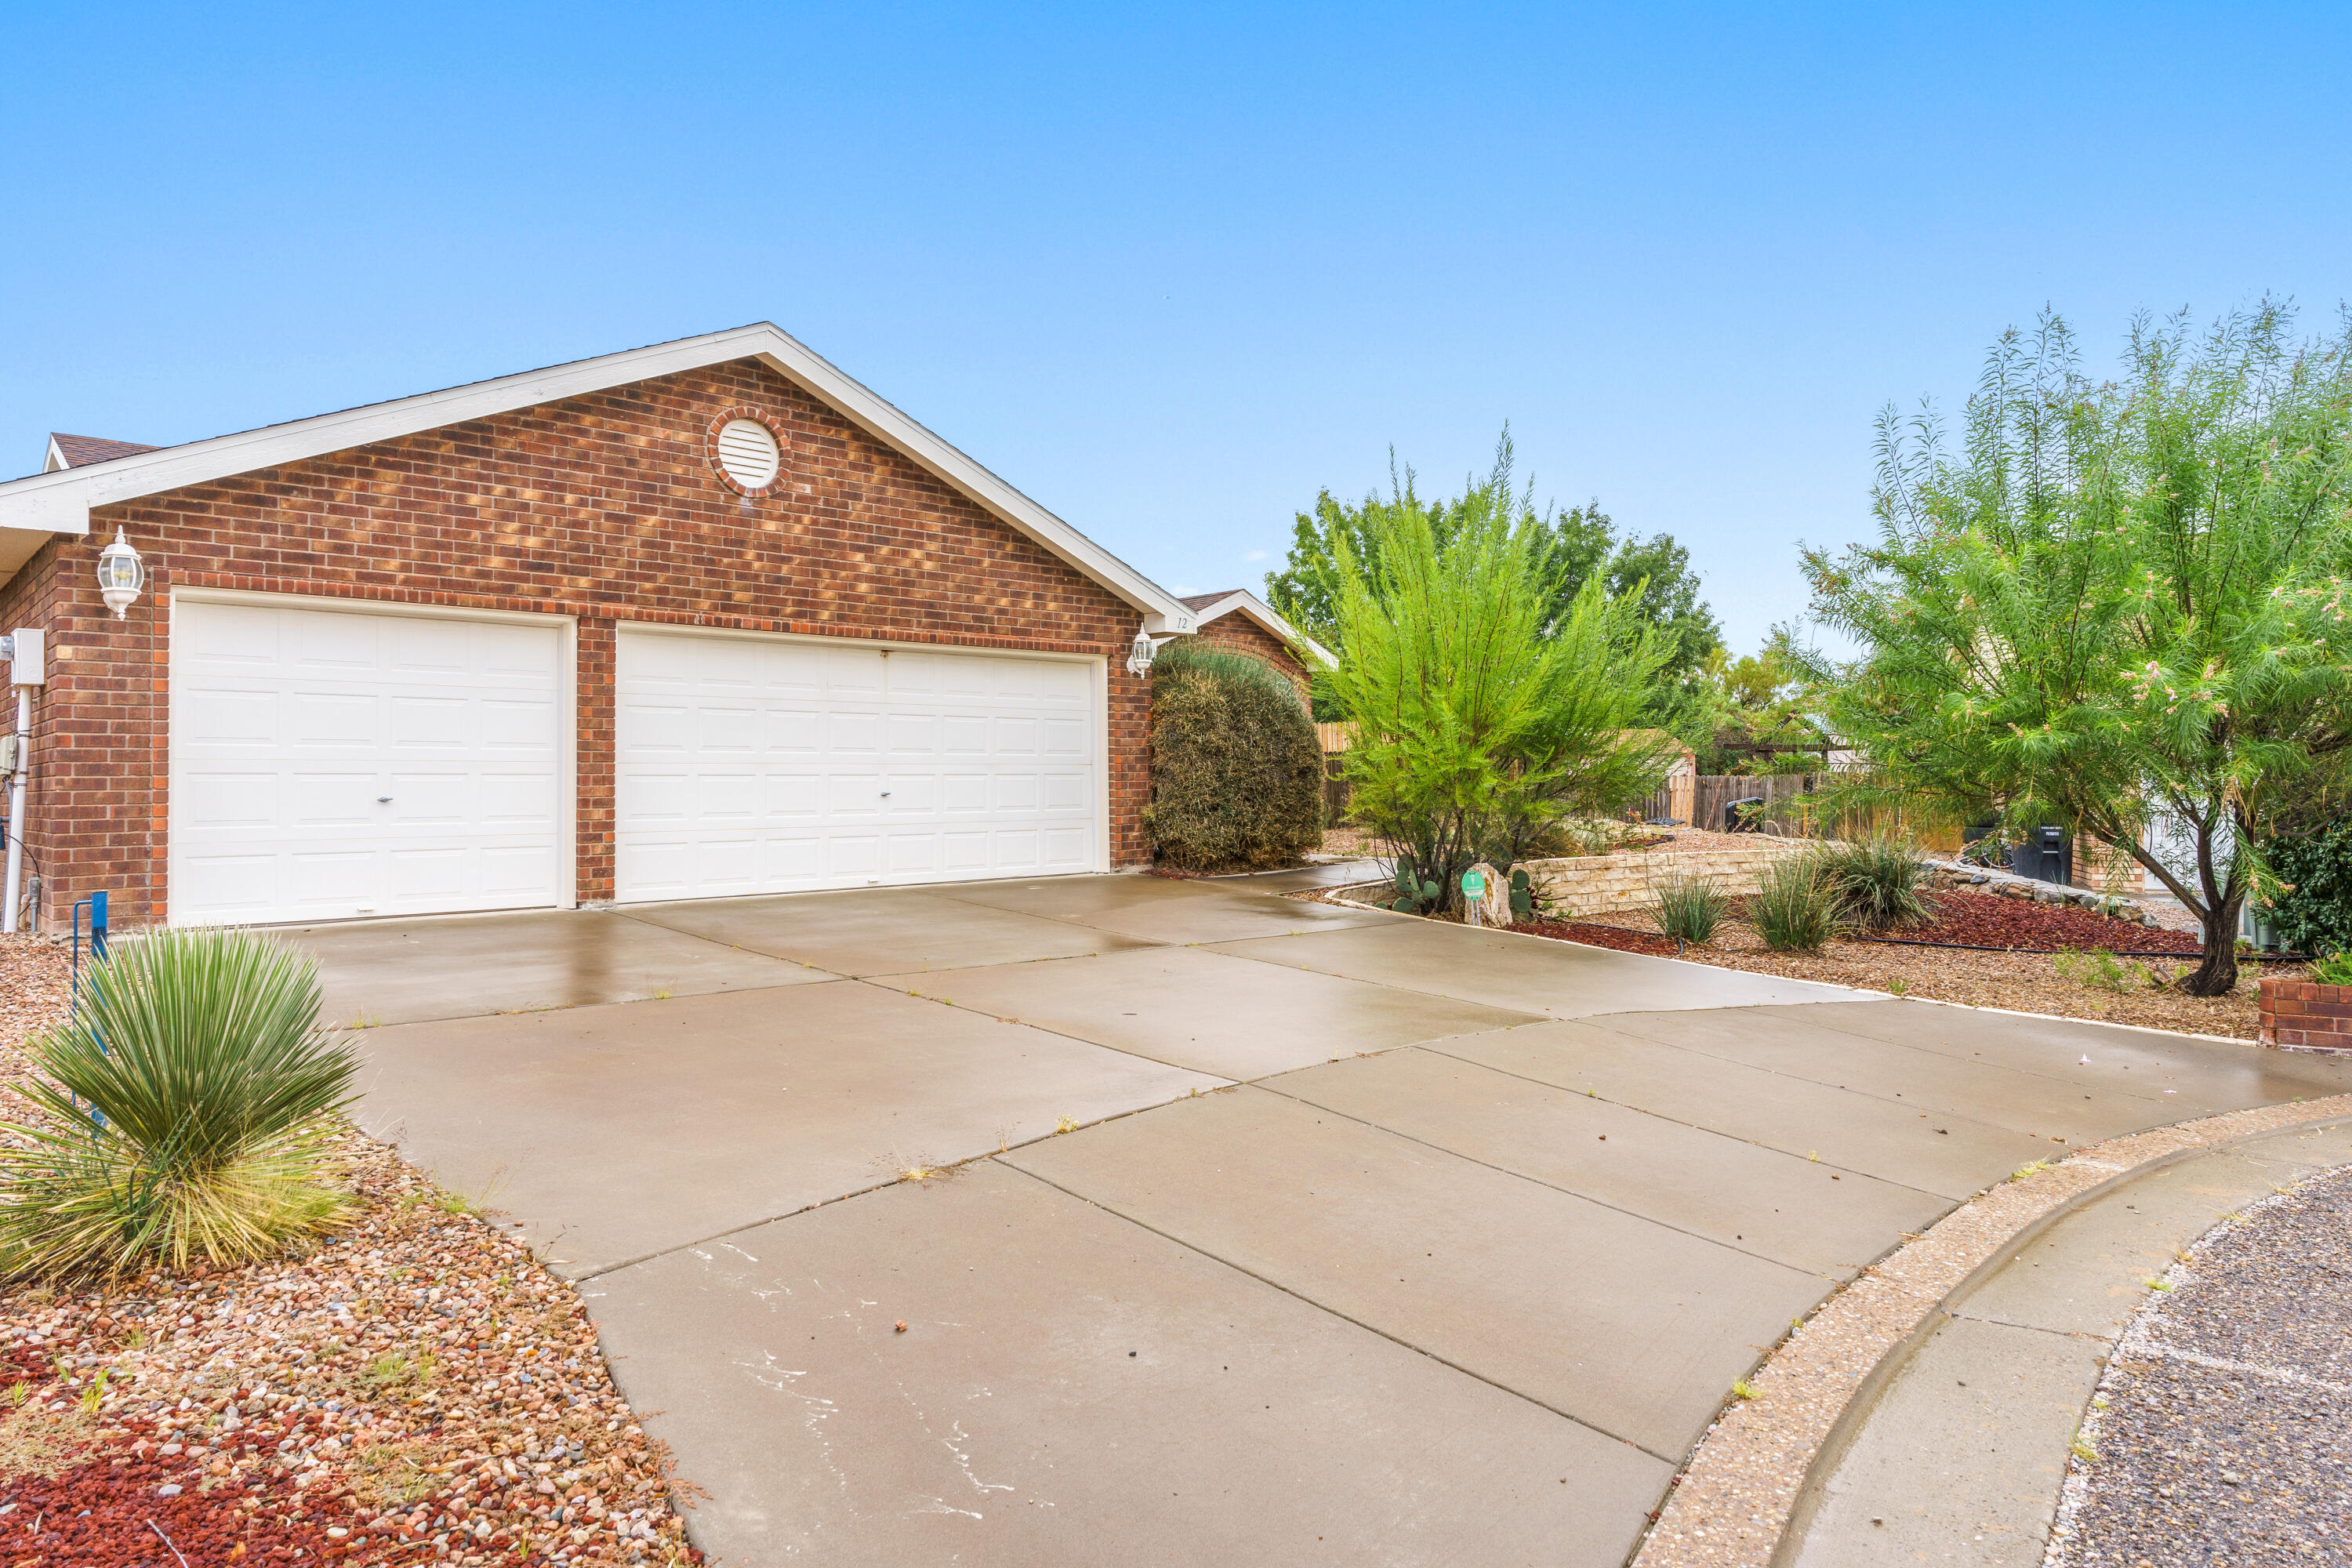 Come see this Sivage Home in well established neighborhood in Los Lunas, The home features include new flooring, all new neutral paint throughout an open floor plan, spacious Kitchen, Formal Dining and Living Area plus separate Family Area.  Separate Study and the bedrooms are generously sized.  Home in tucked away in a court on a large lot with landscaping. Don't miss the opportunity to make this place your own.